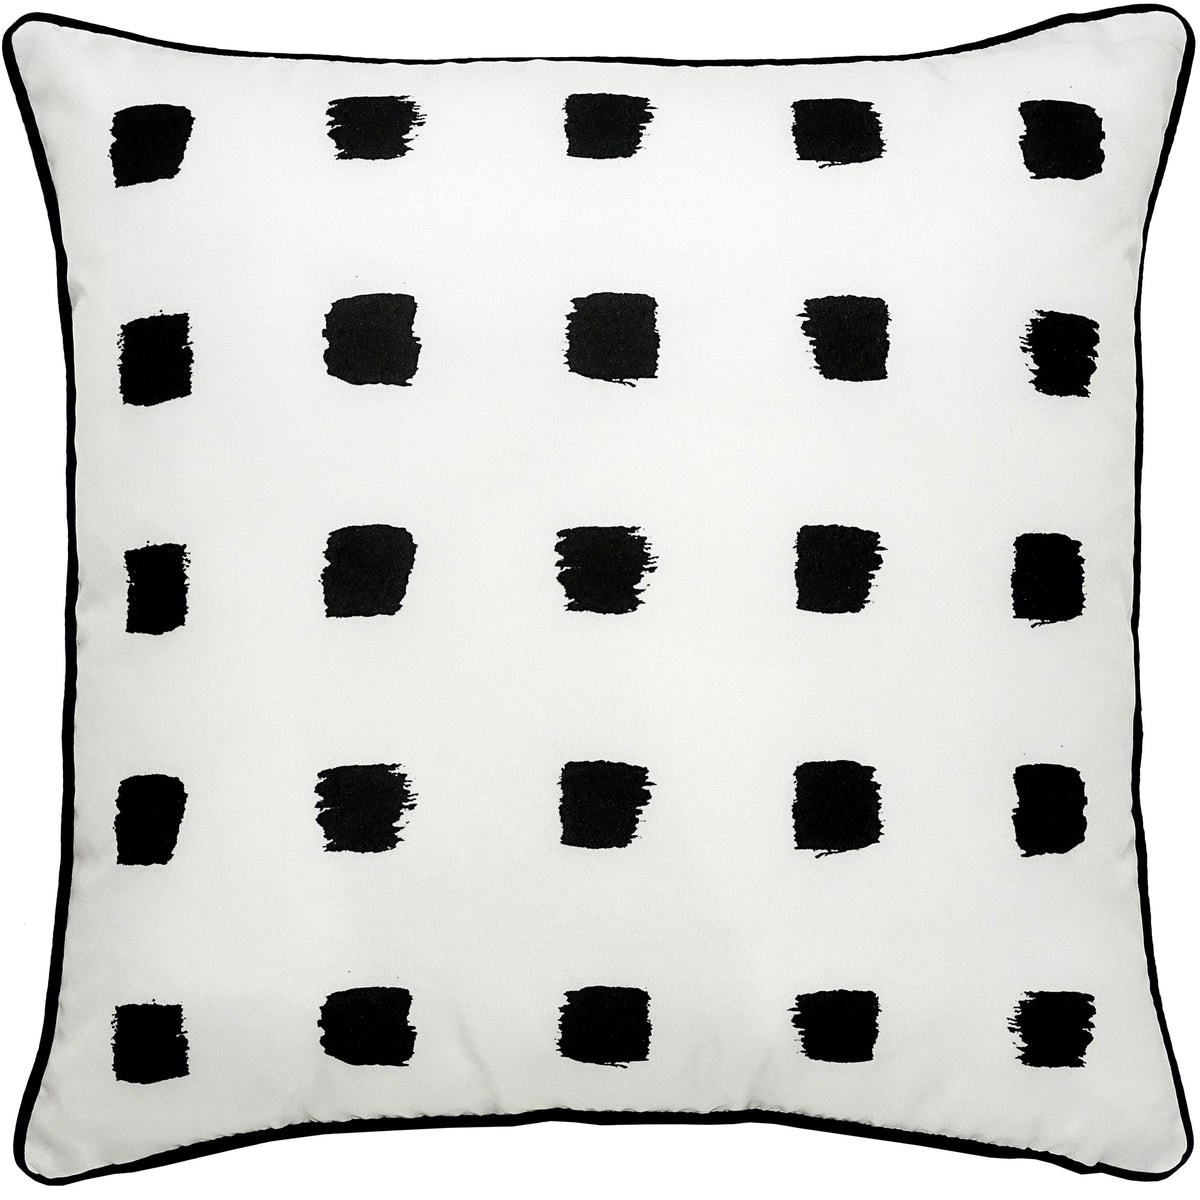 Rockhill White with Black Accents Pillow 22"x22"